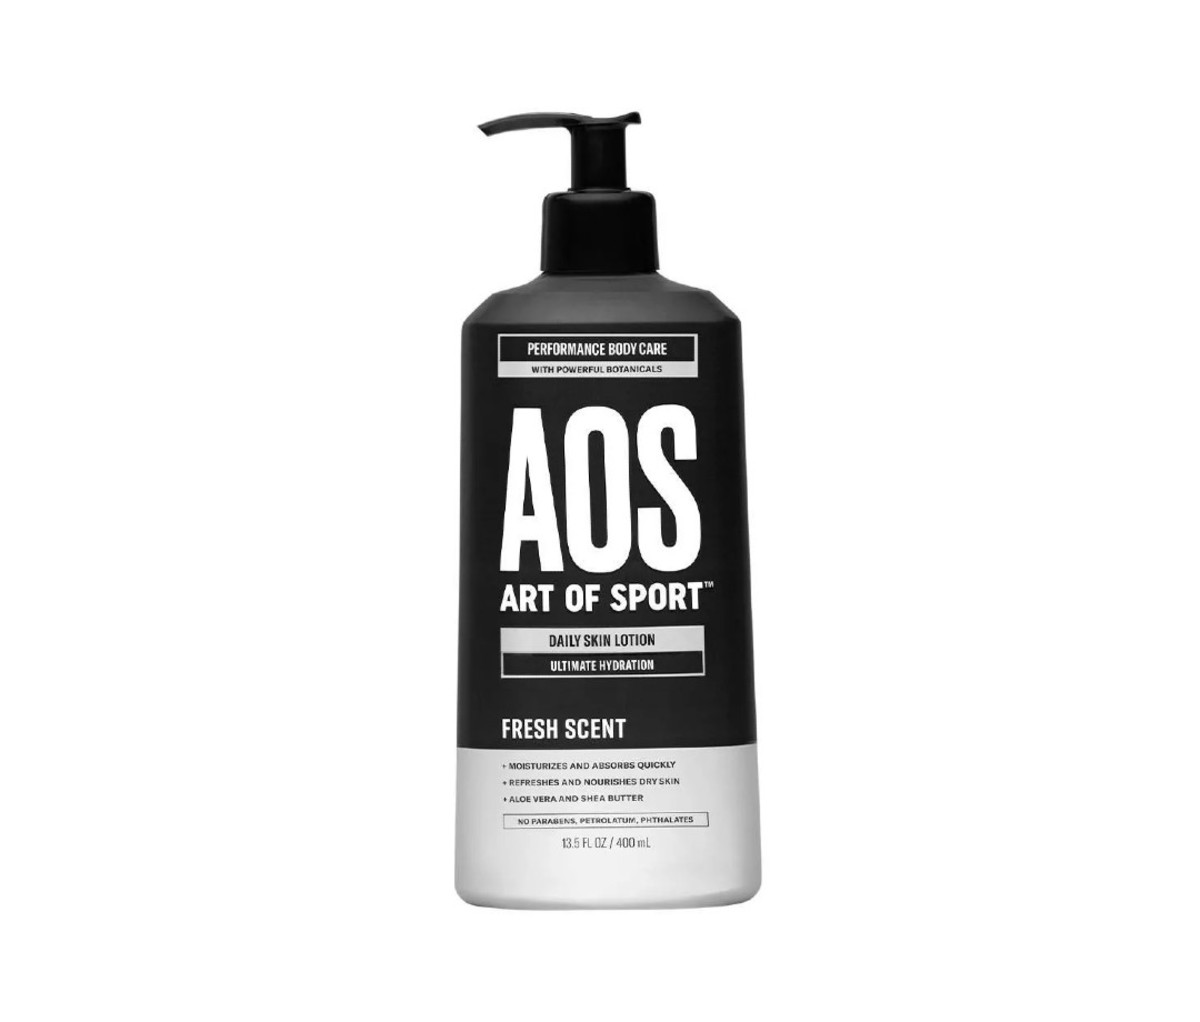 Art of Sport Daily Skin Lotion